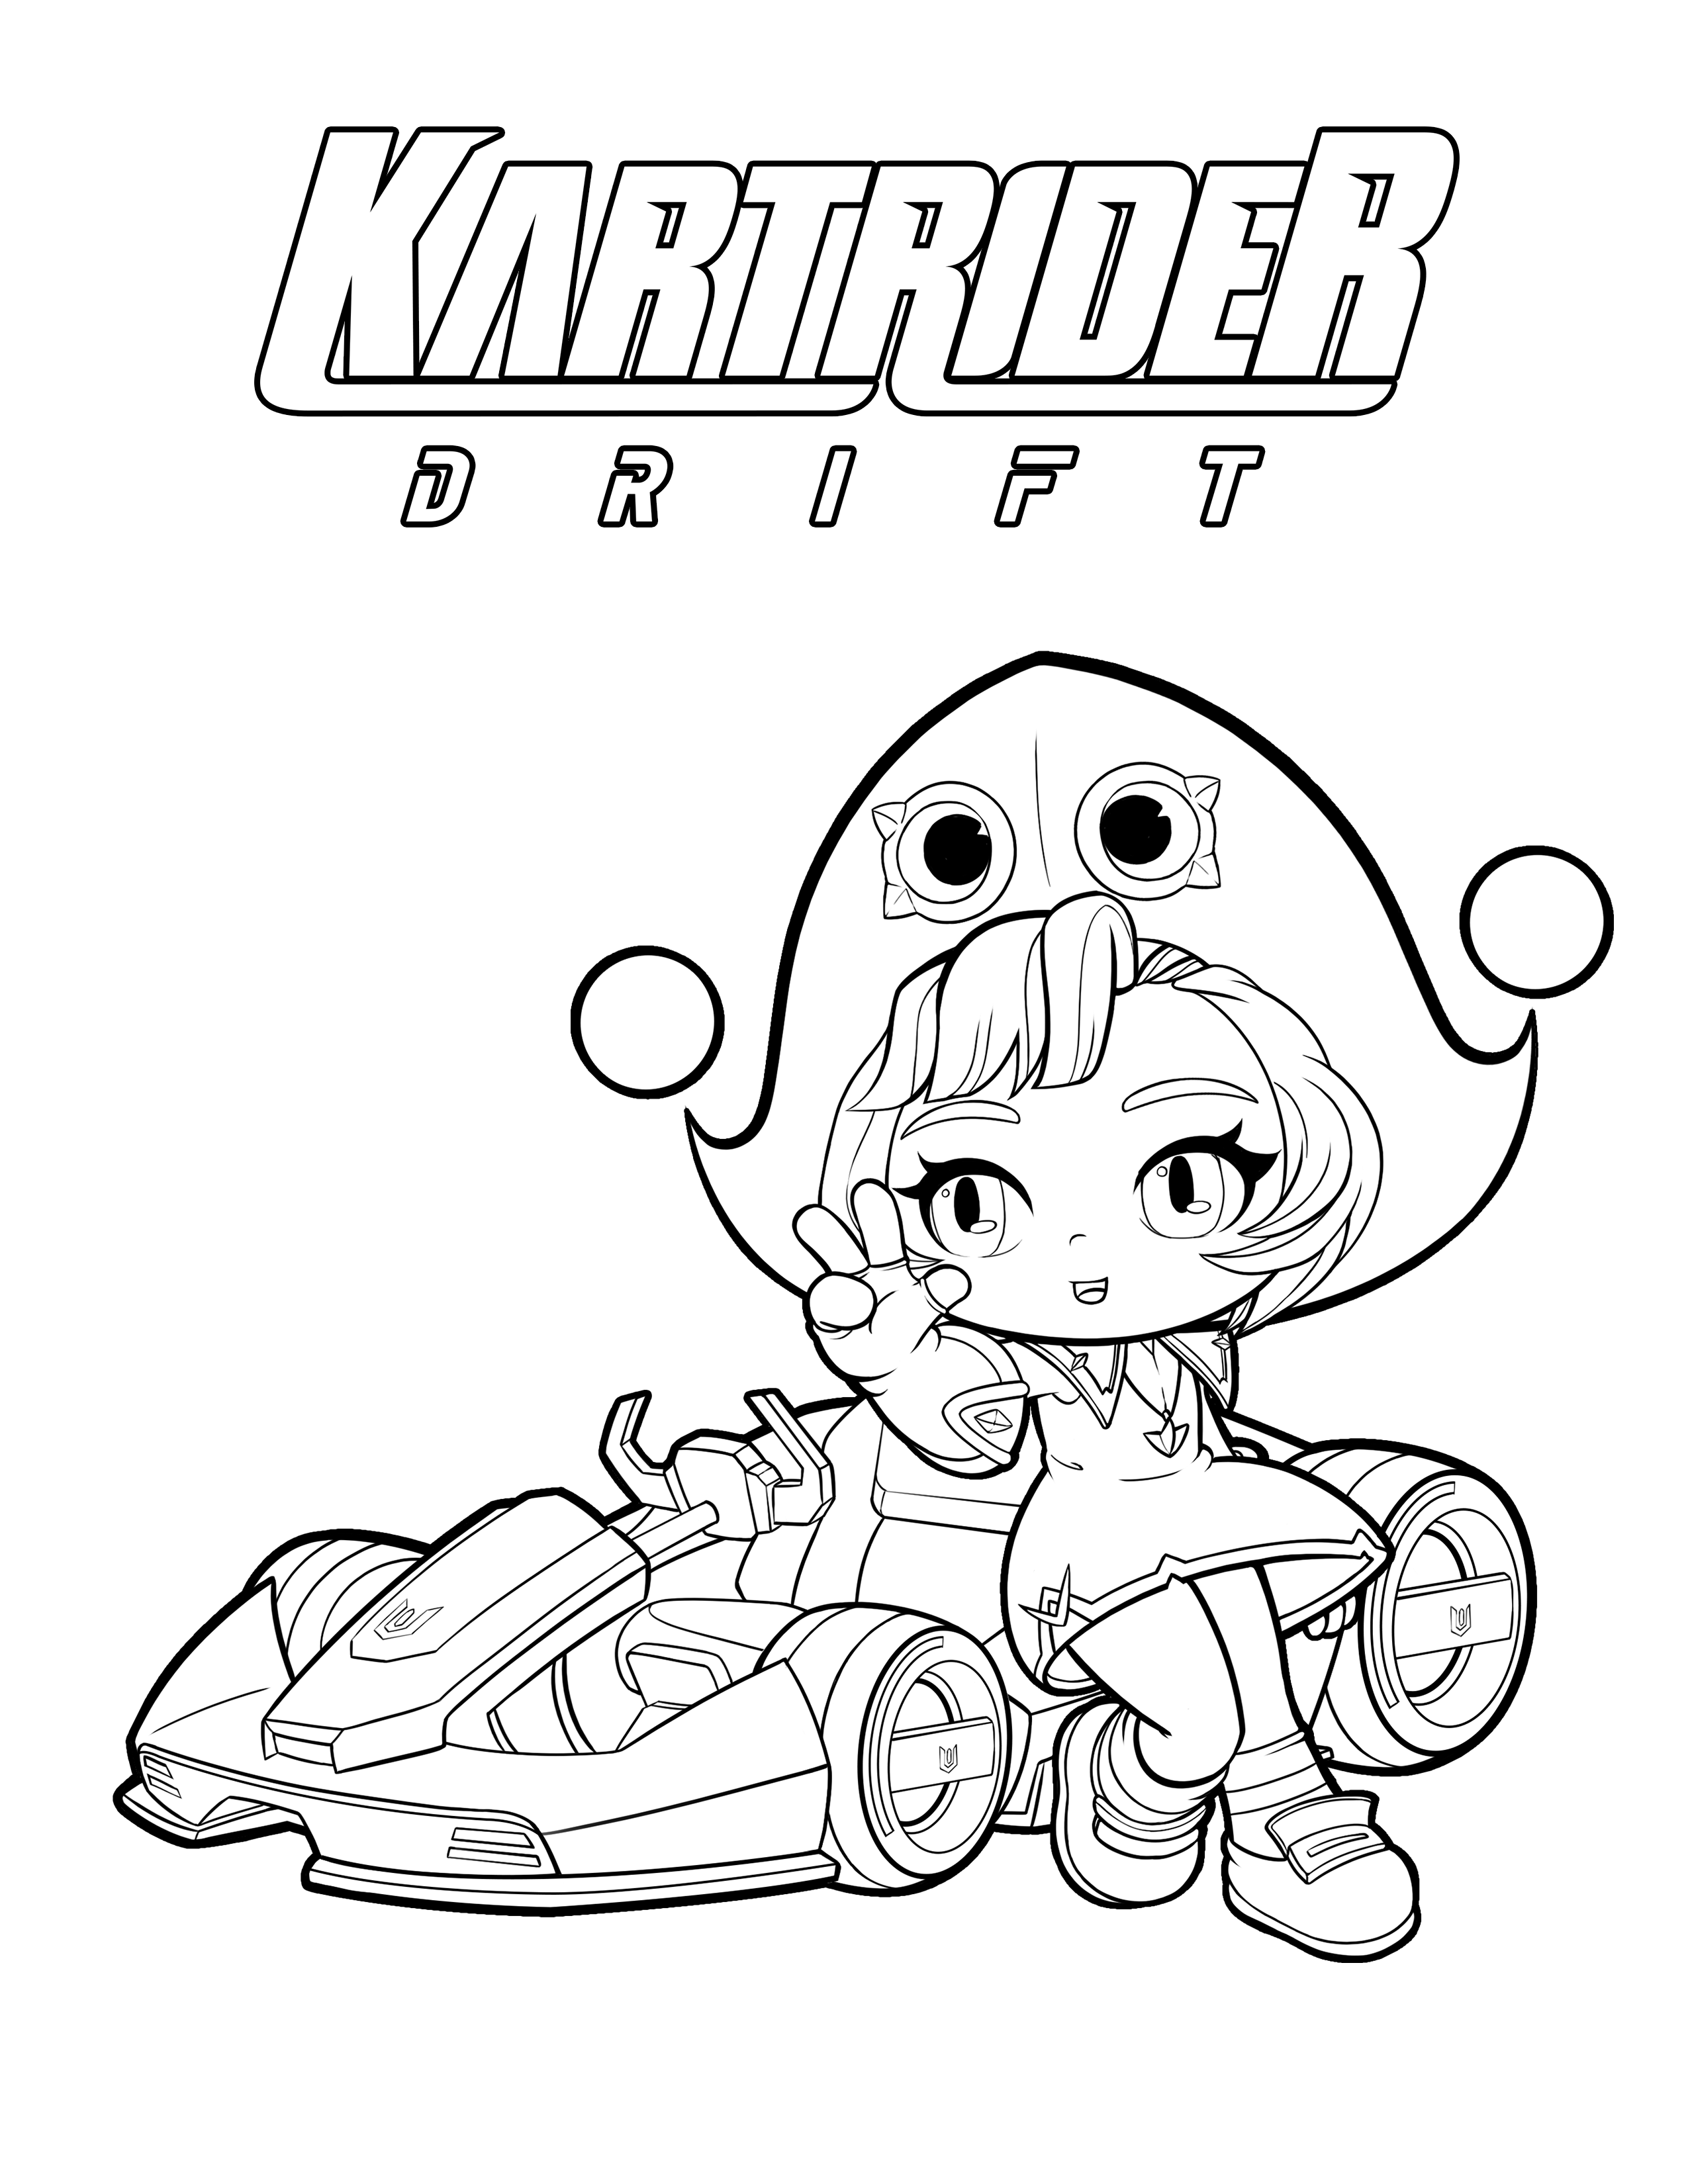 krw-1834-230524-coloring-page-1-2550x3300.png